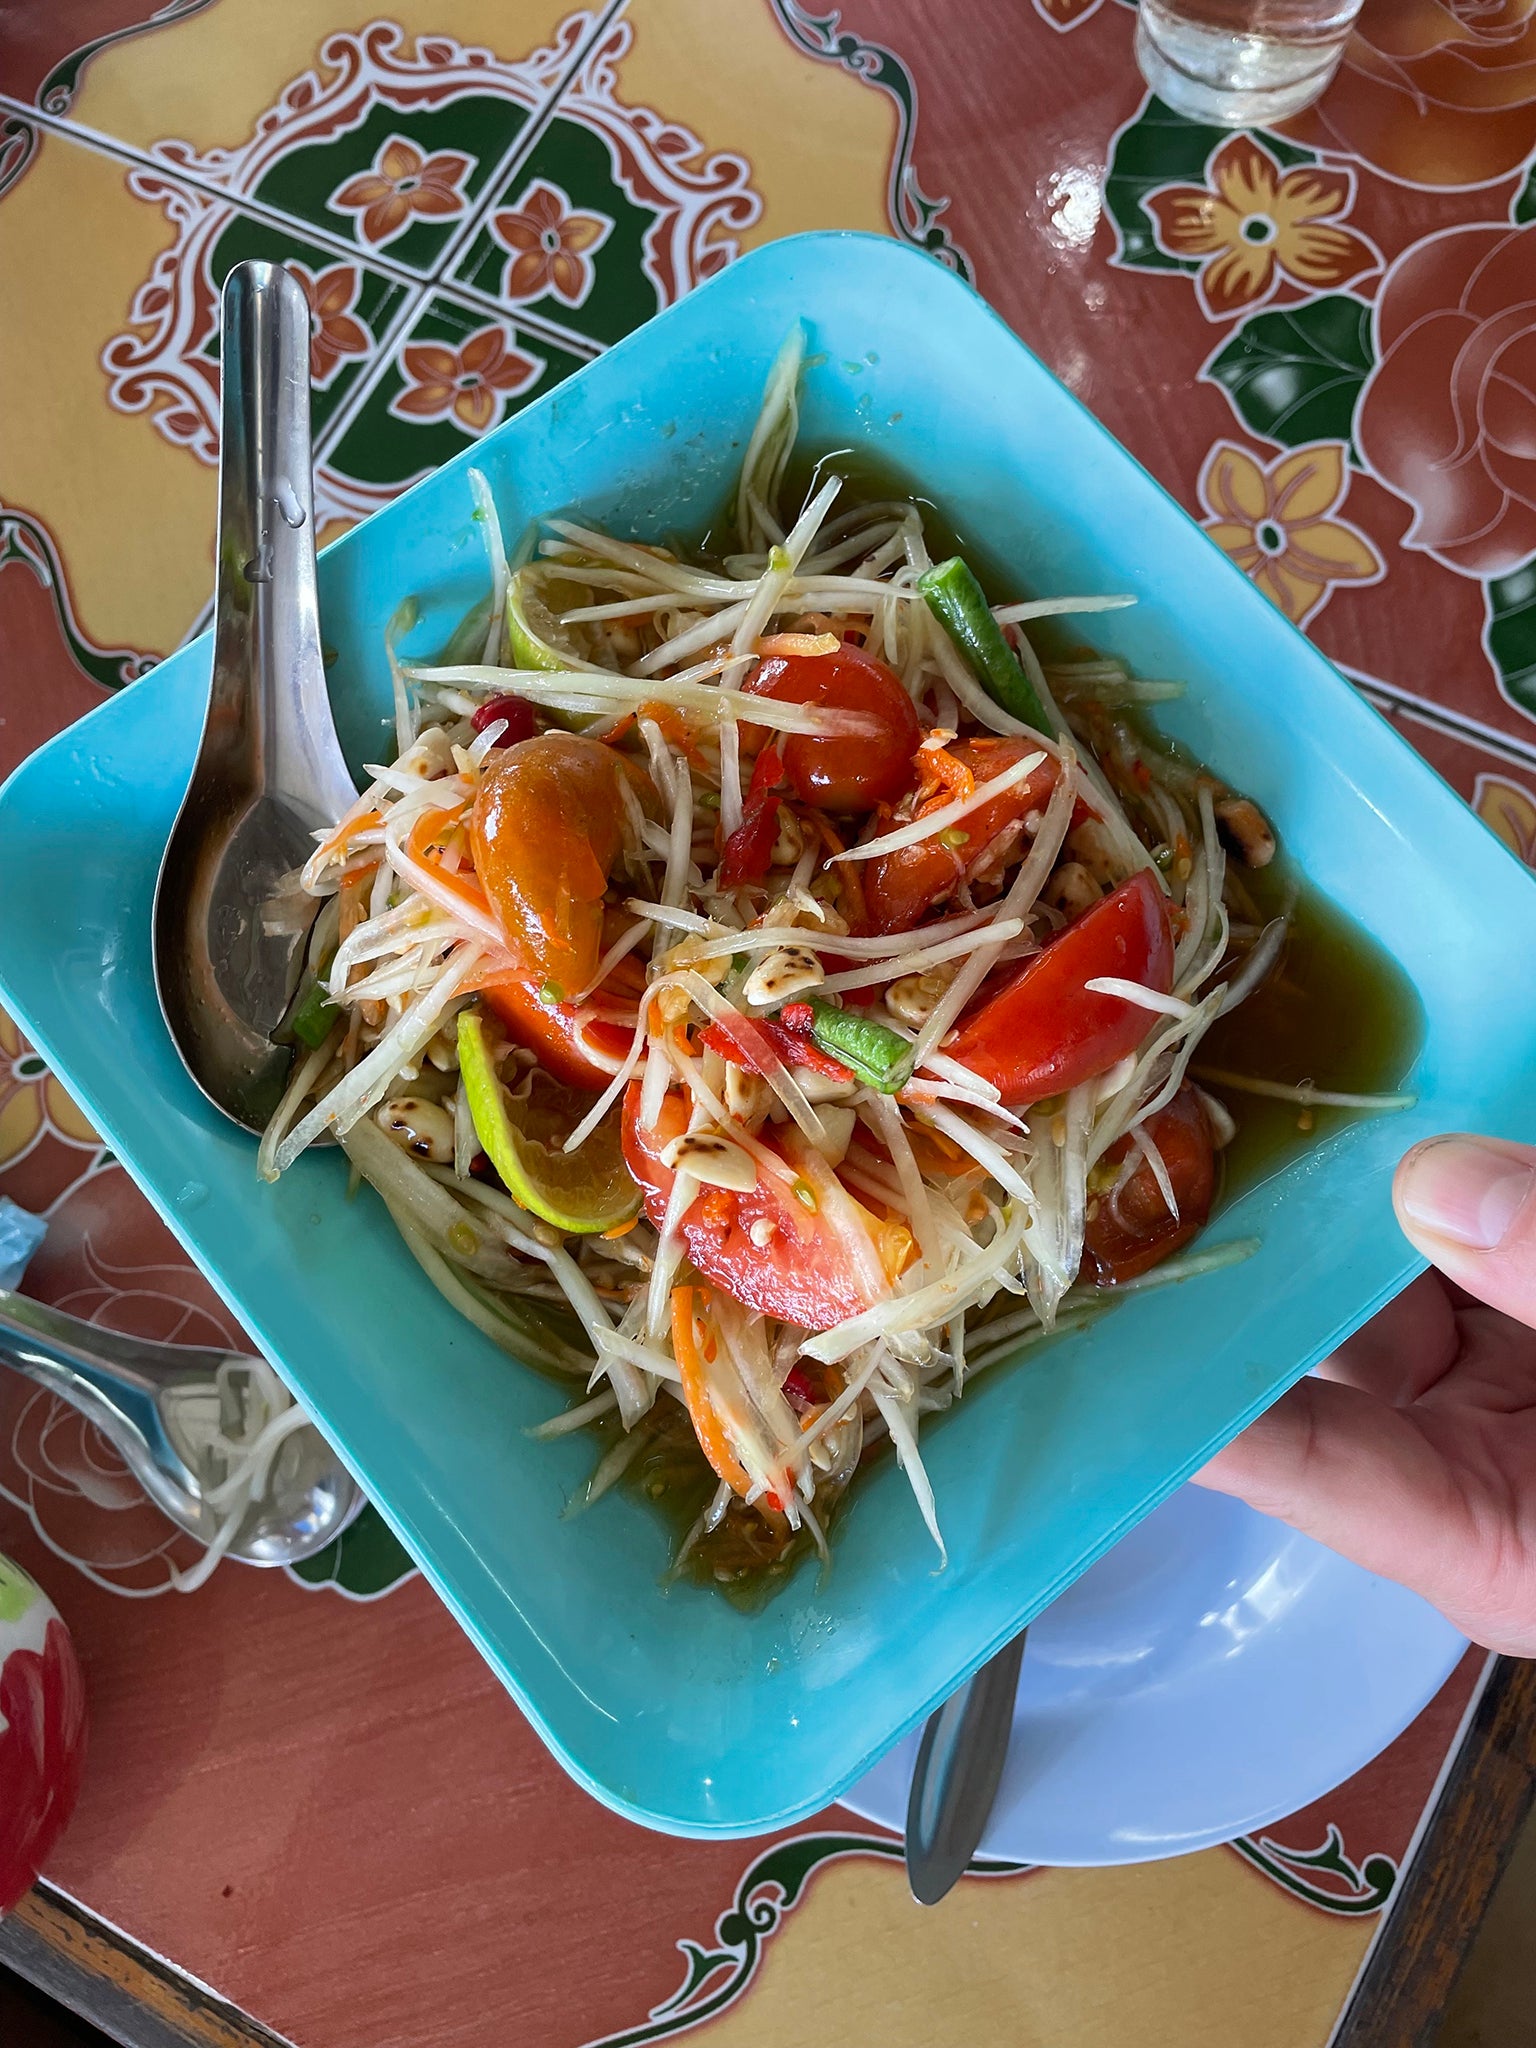 It’s traditional to add one bird’s eye chilli for every year of your life to your som tam, Thailand’s green papaya salad